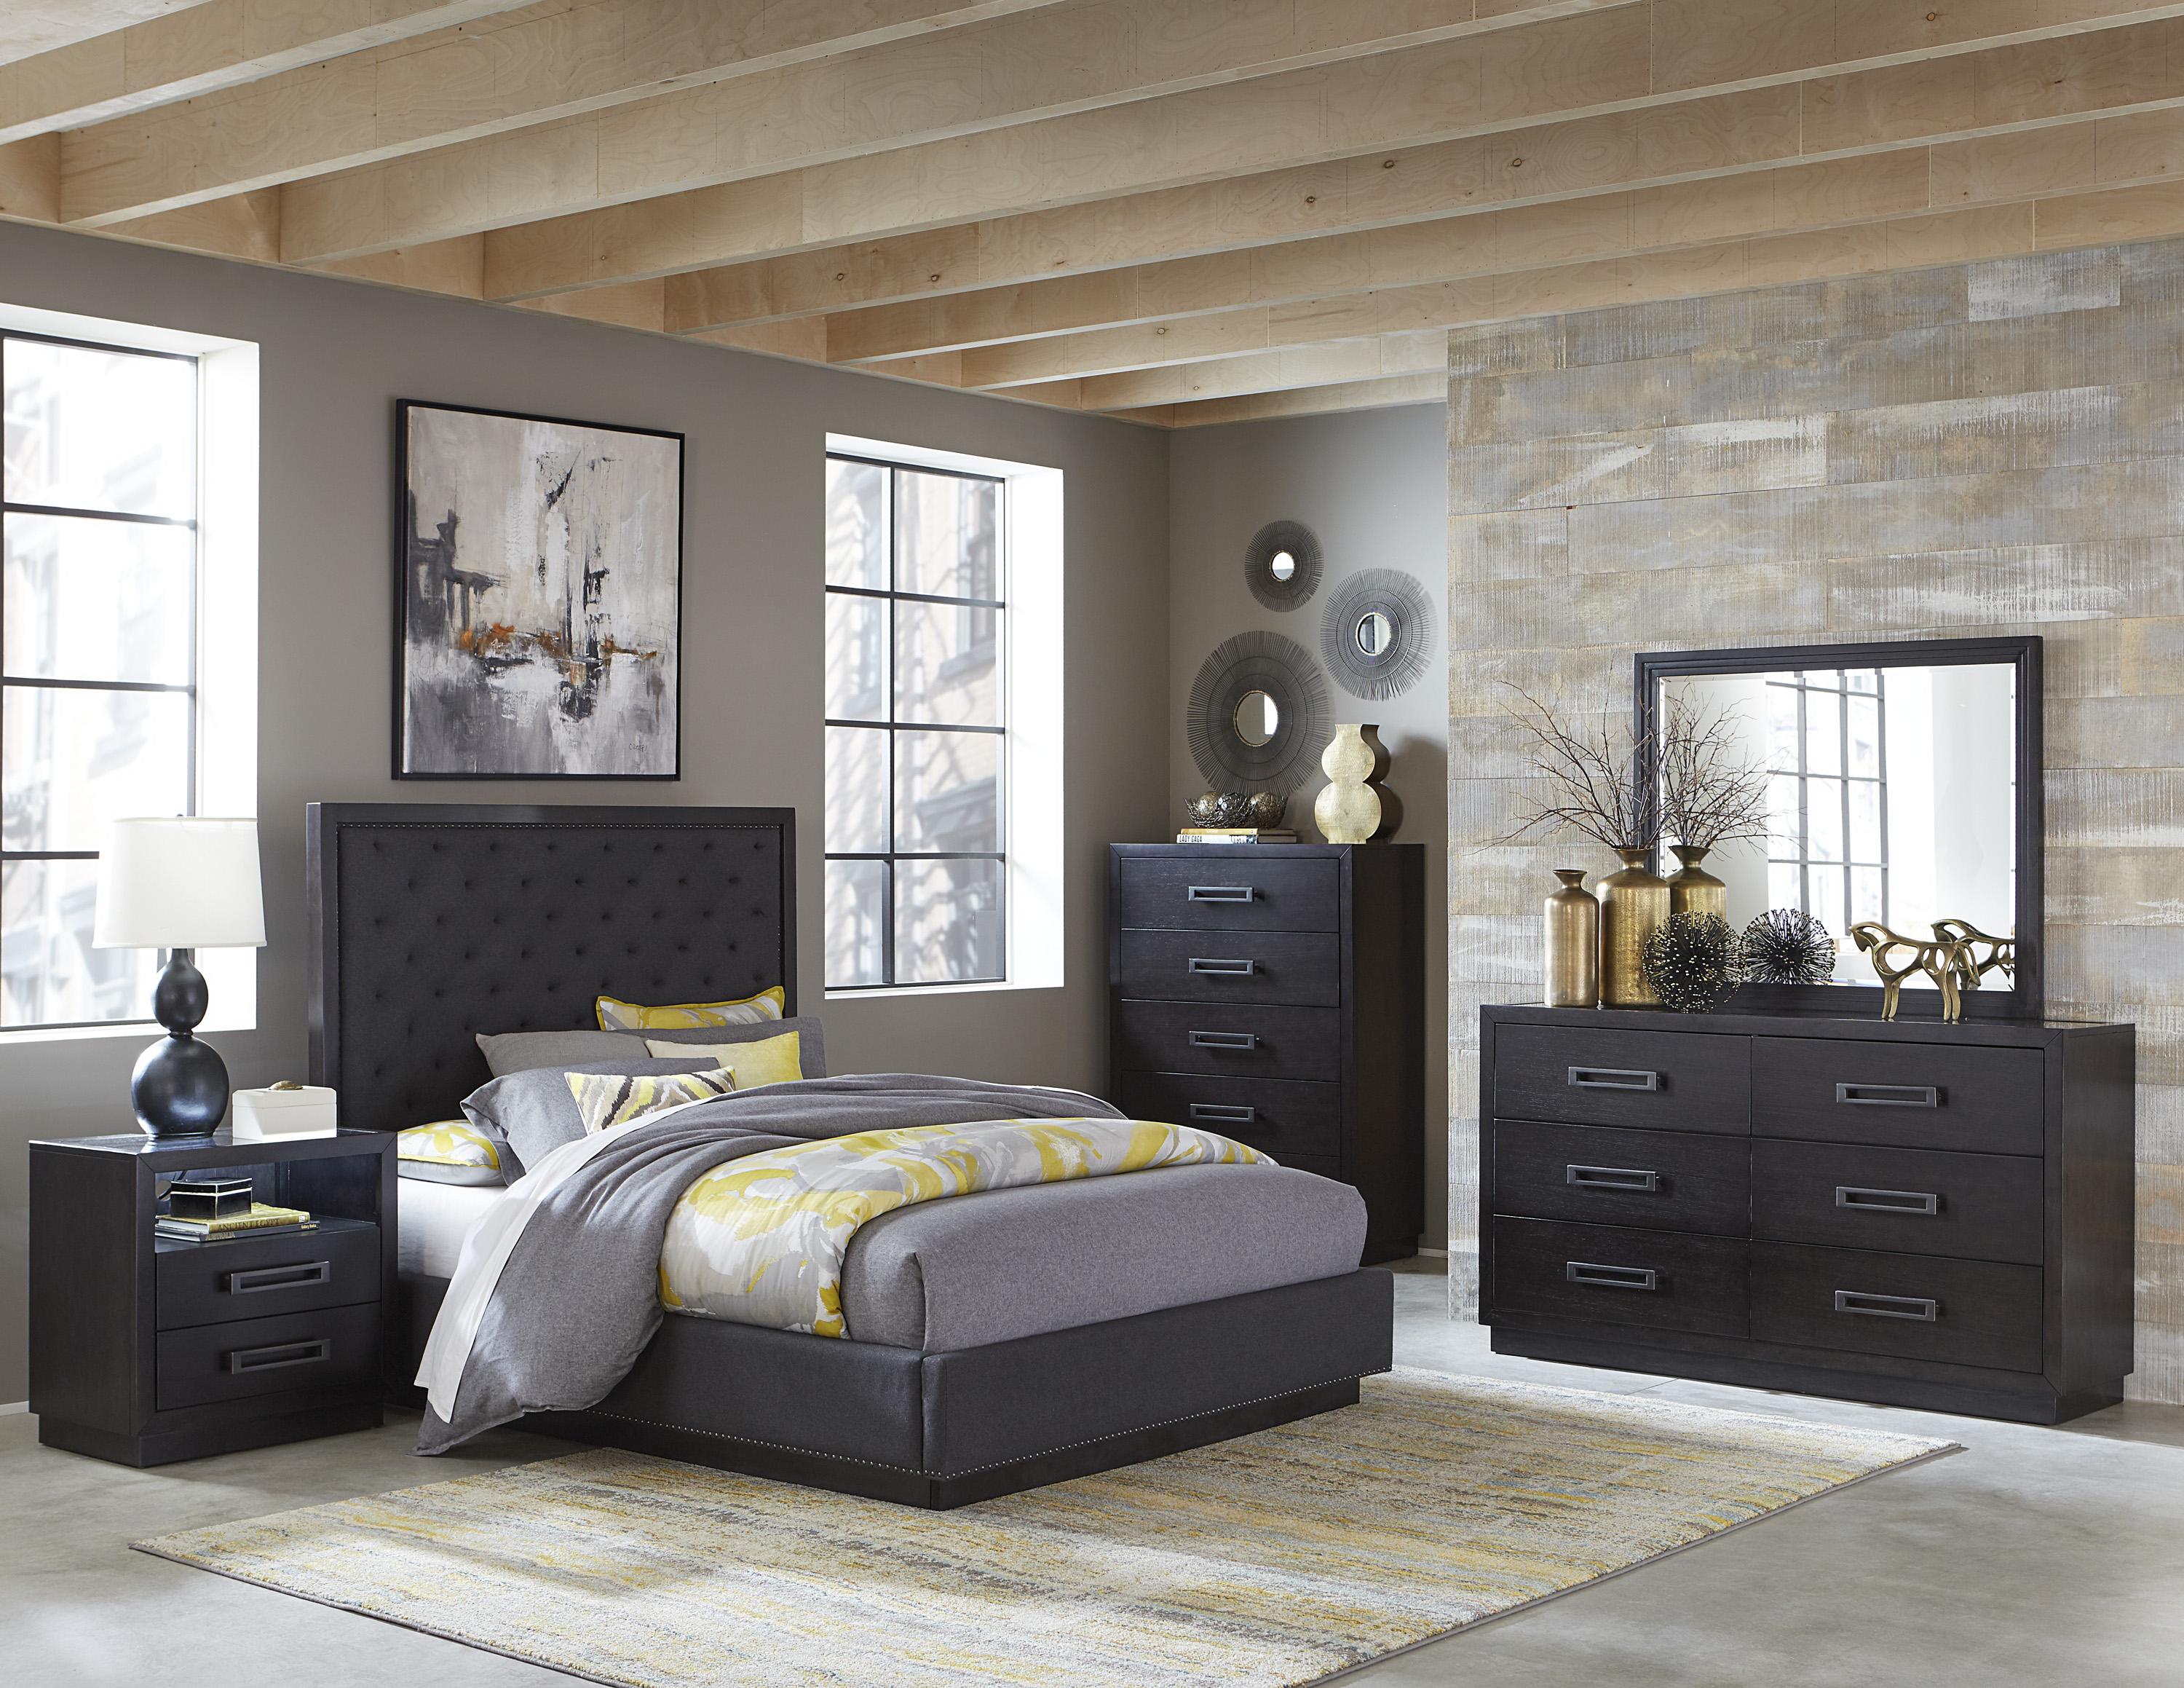 Modern Bedroom Set 5424-1-5PC Larchmont 5424-1-5PC in Charcoal Polyester